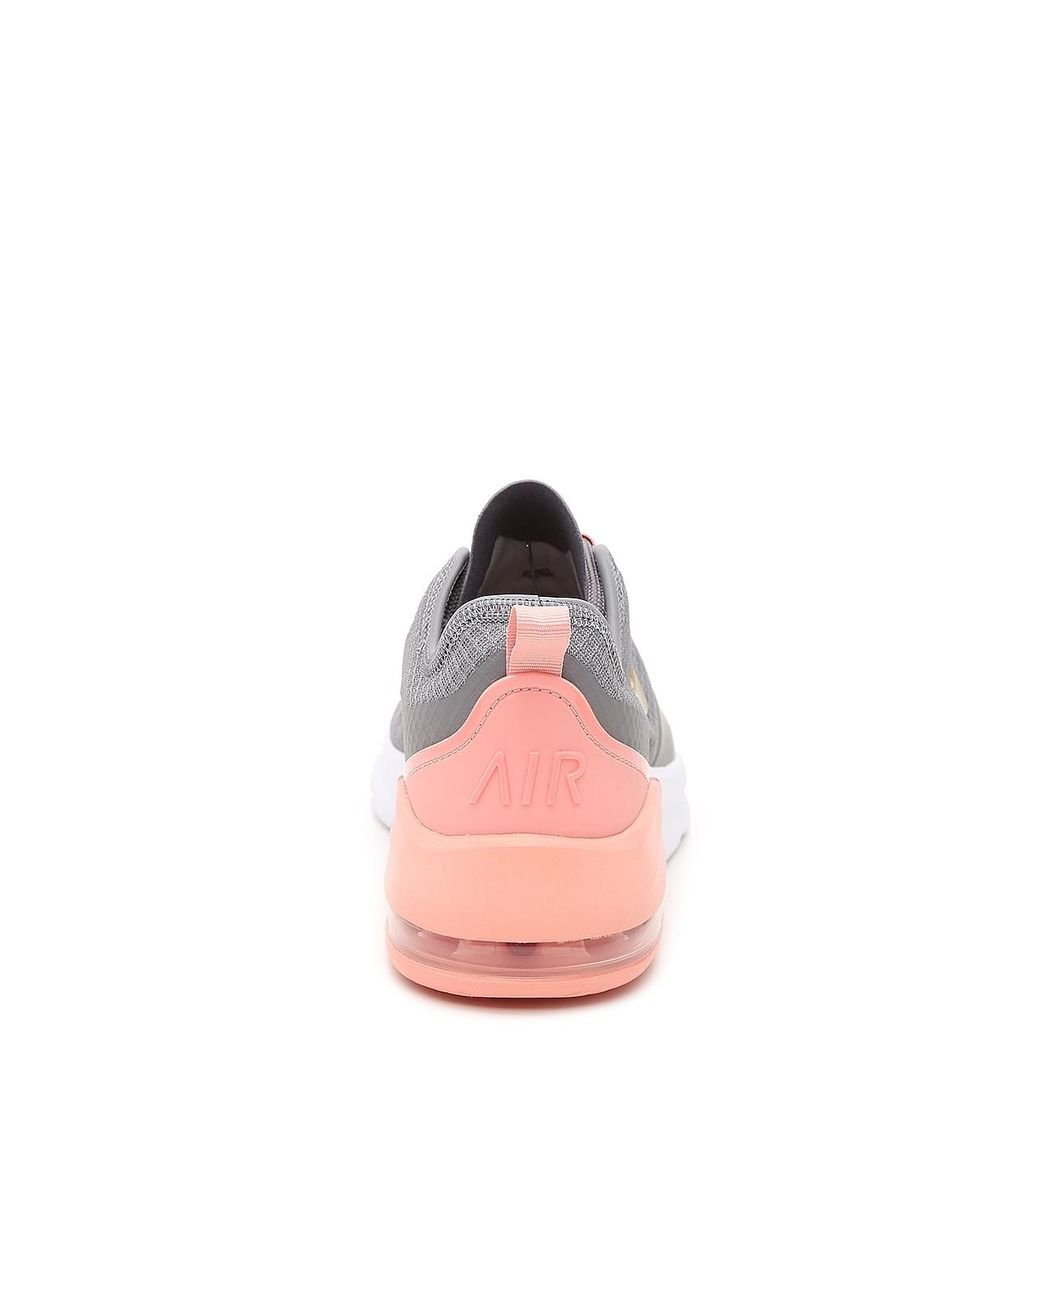 Nike Air Max Motion 2 Shoes in Grey/Pink/White (Gray) | Lyst